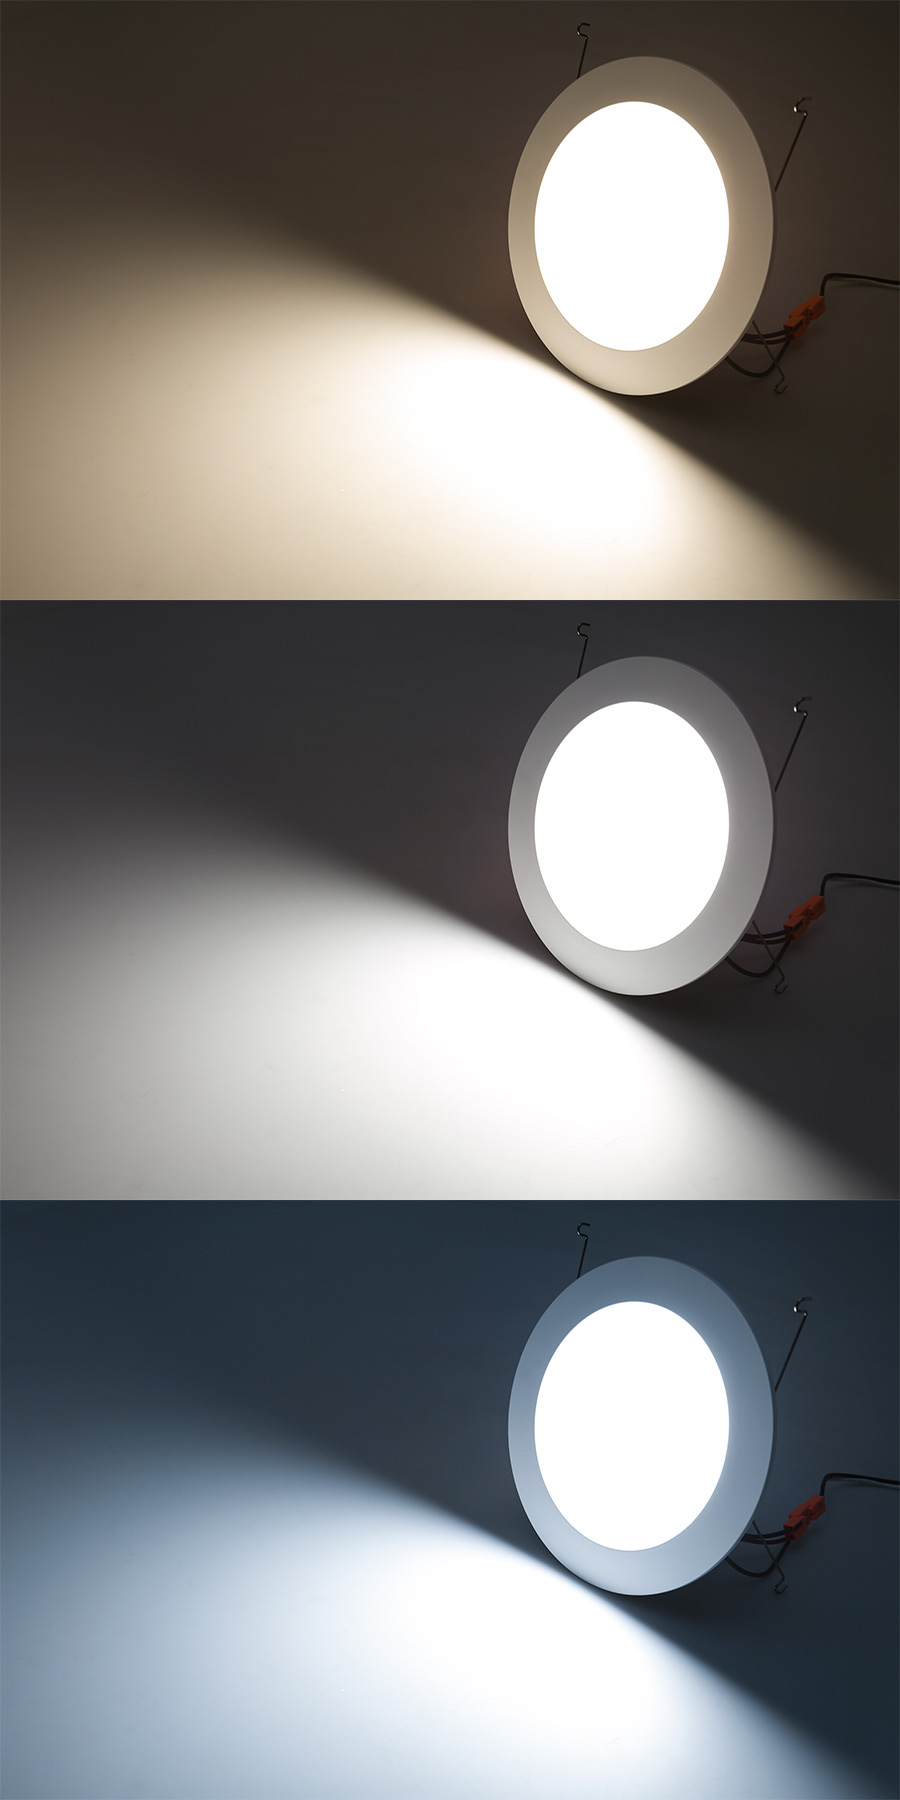 LED Recessed Lighting Kit for 6" Cans - Retrofit LED Downlight w/ Open Trim - 100 Watt Equivalent - Dimmable - 1,500 Lumens